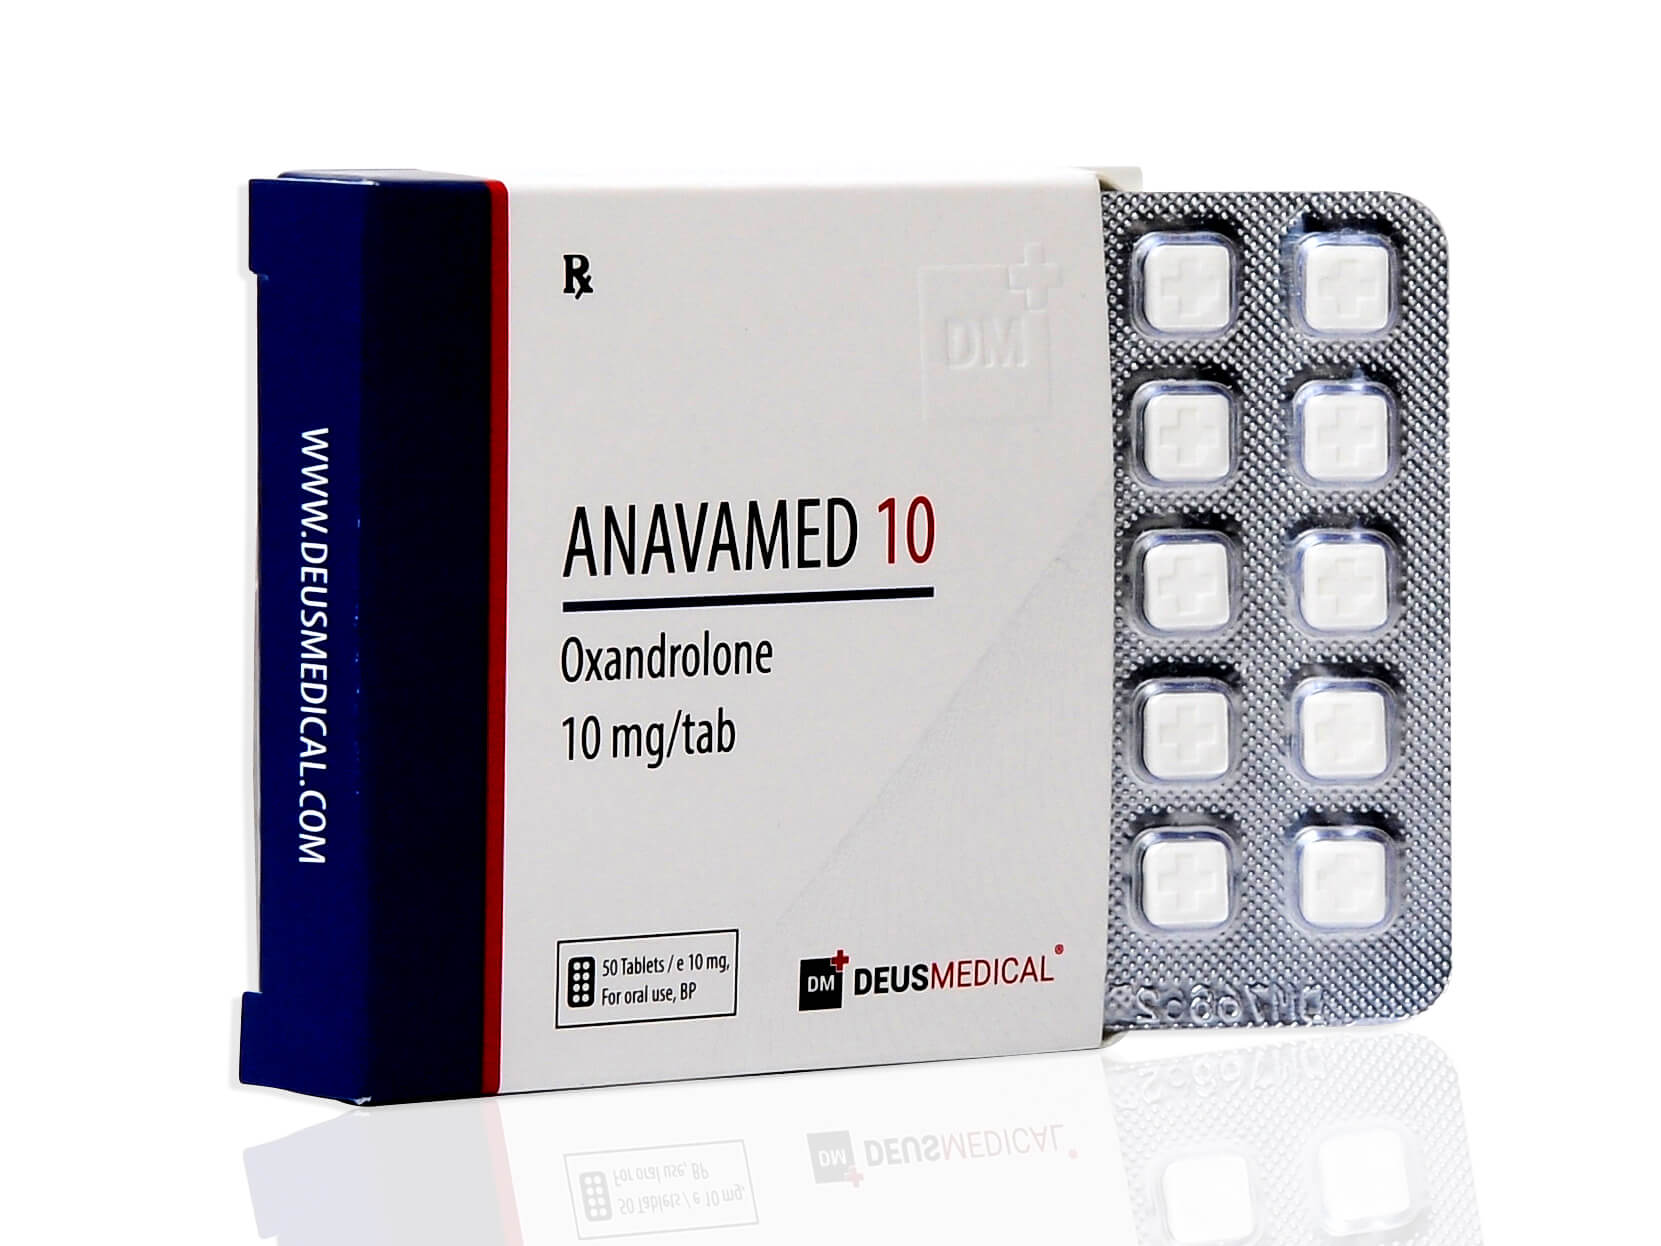 ANAVAMED 10 (Oxandrolone) - 50tabs of 10mg - DEUS-MEDICAL | STERO.is